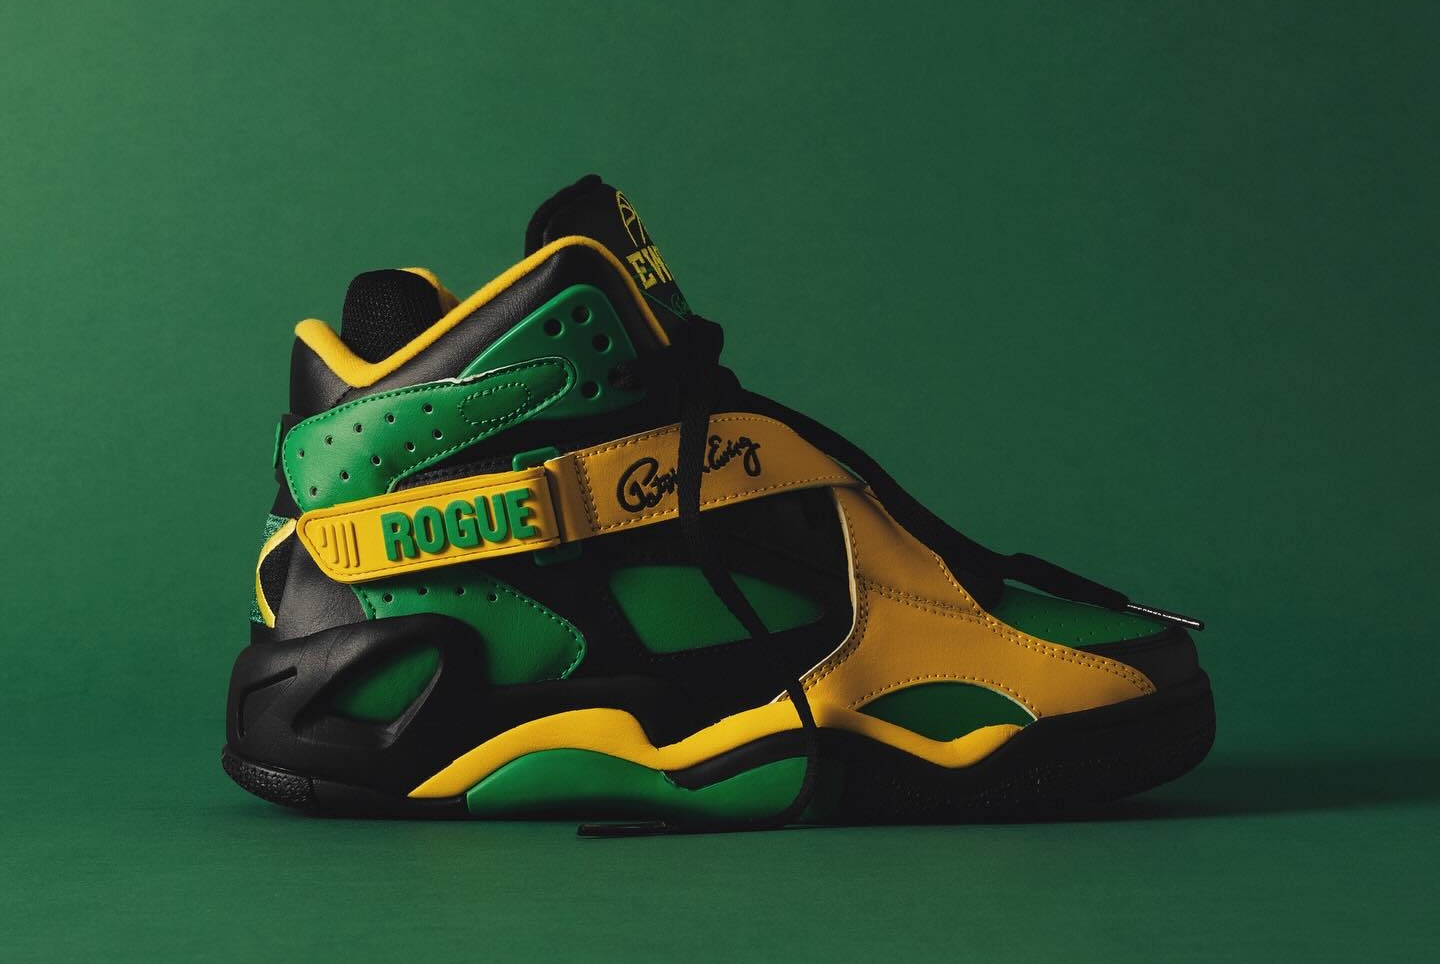 Jamaican-American Basketball Hall of Famer Patrick Ewing Drops These Hot Jamaica-Themed Sneakers